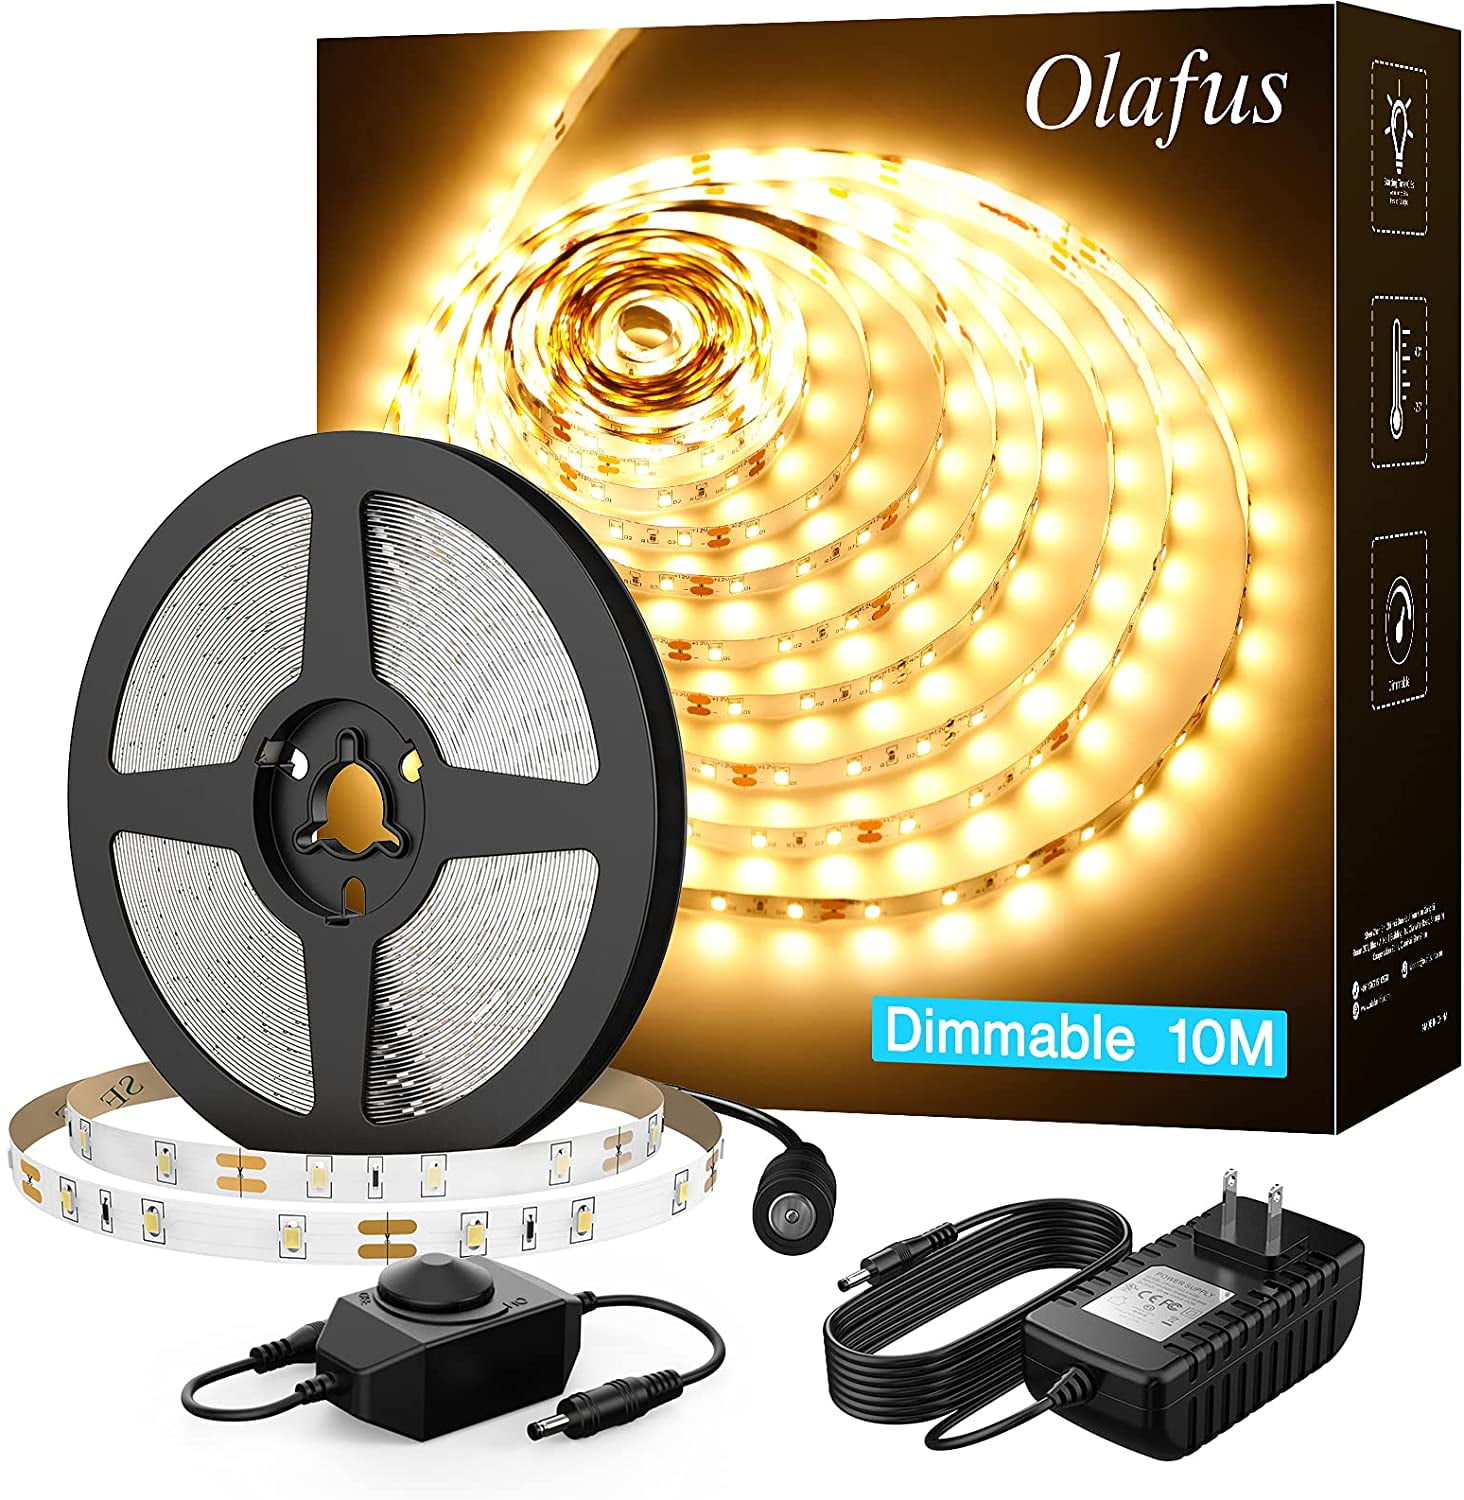 Cabinet Olafus Dimmable LED Strip Lights Kit Stairway Kitchen 5M 16.4ft 300 2835 LEDs 3000K Warm White Non-Waterproof Ribbon Lighting for Home 12V LED Tape Light with Plug Bar 